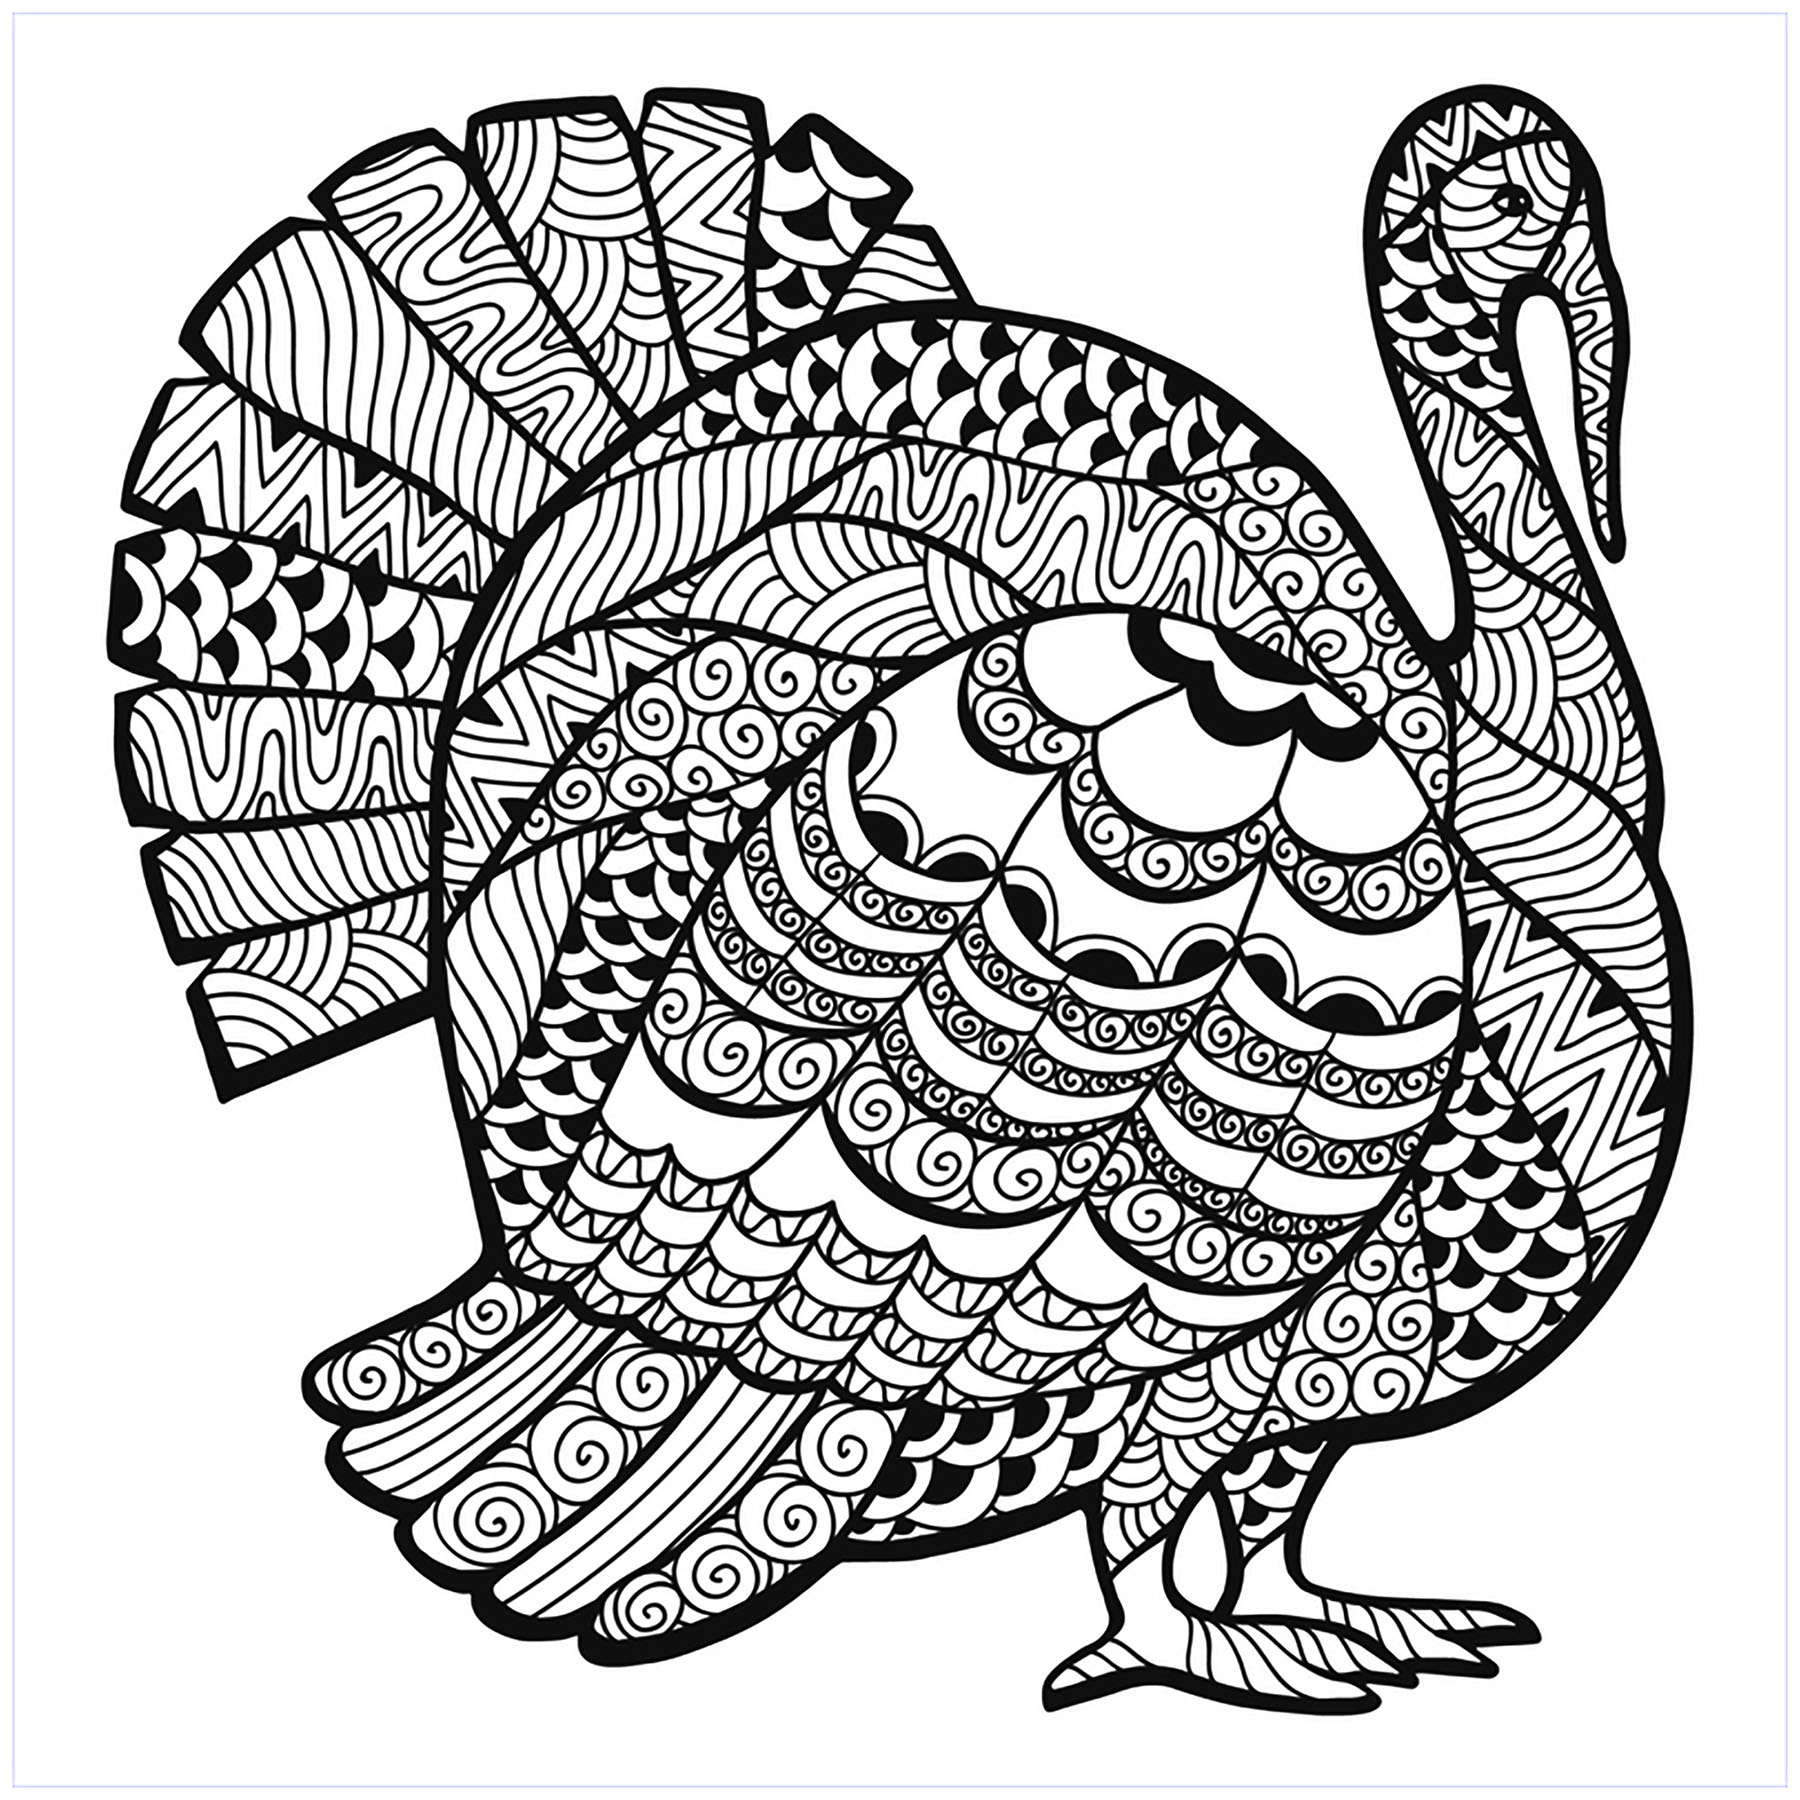 Thanksgiving free to color for children - Thanksgiving Kids Coloring Pages